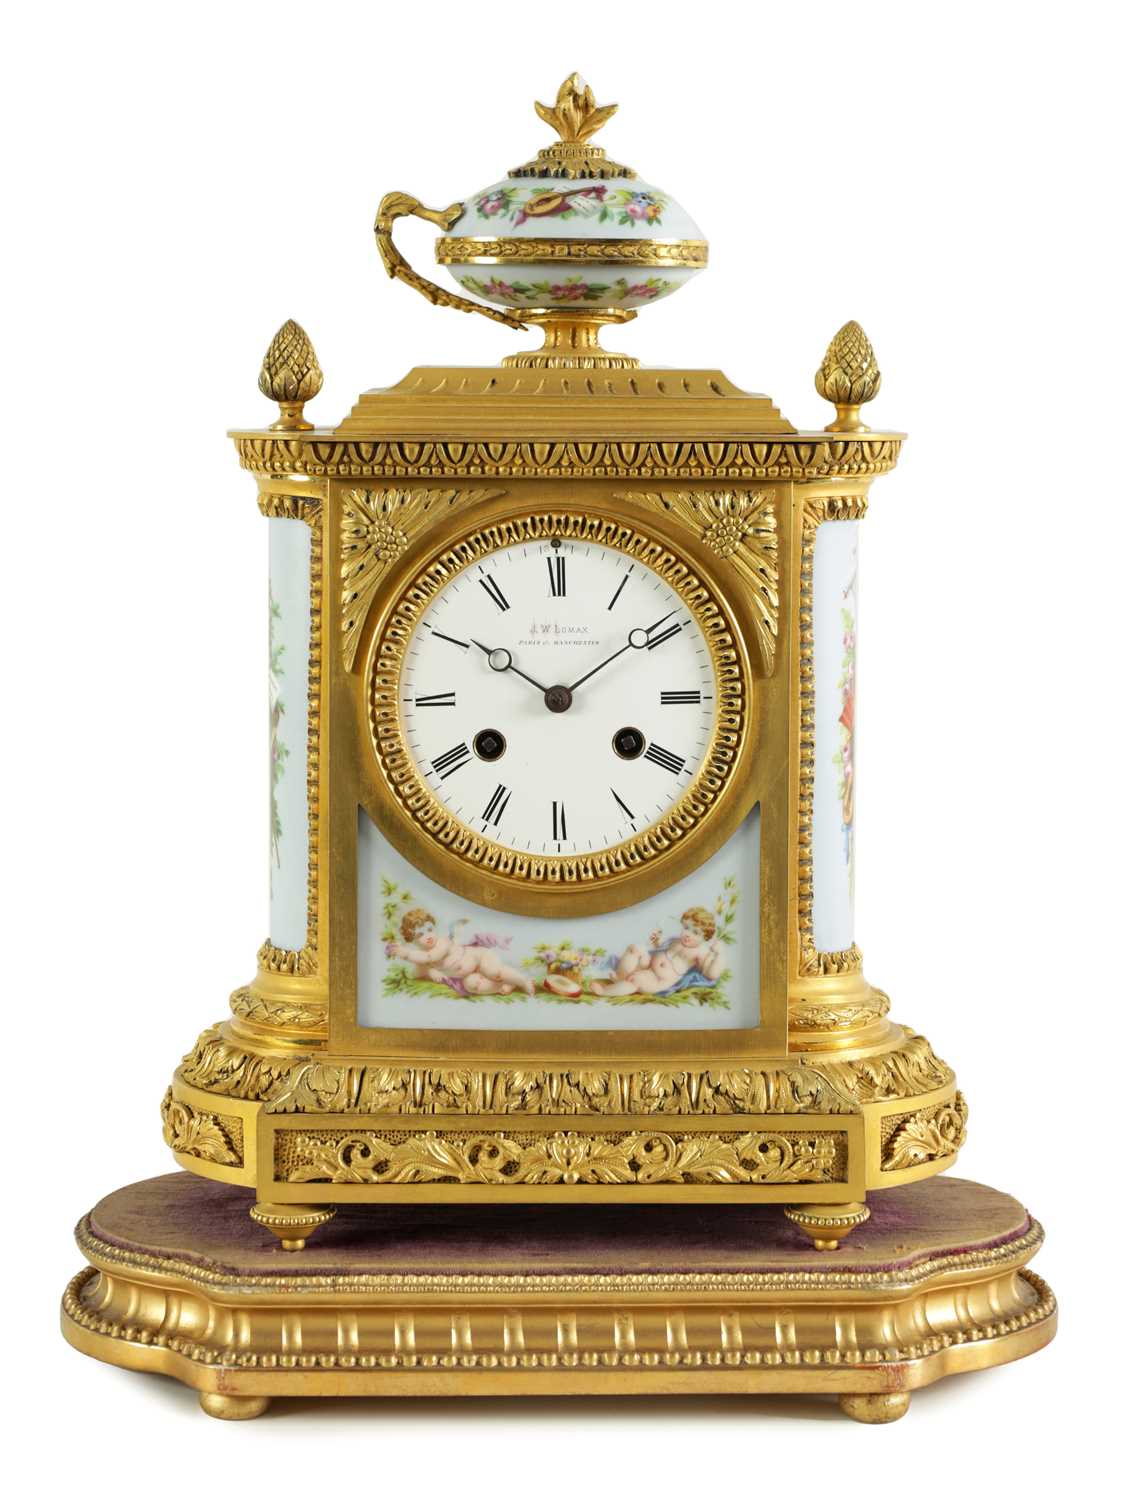 A GOOD QUALITY LATE 19TH CENTURY FRENCH ORMOLU AND PORCELAIN PANELLED MANTEL CLOCK